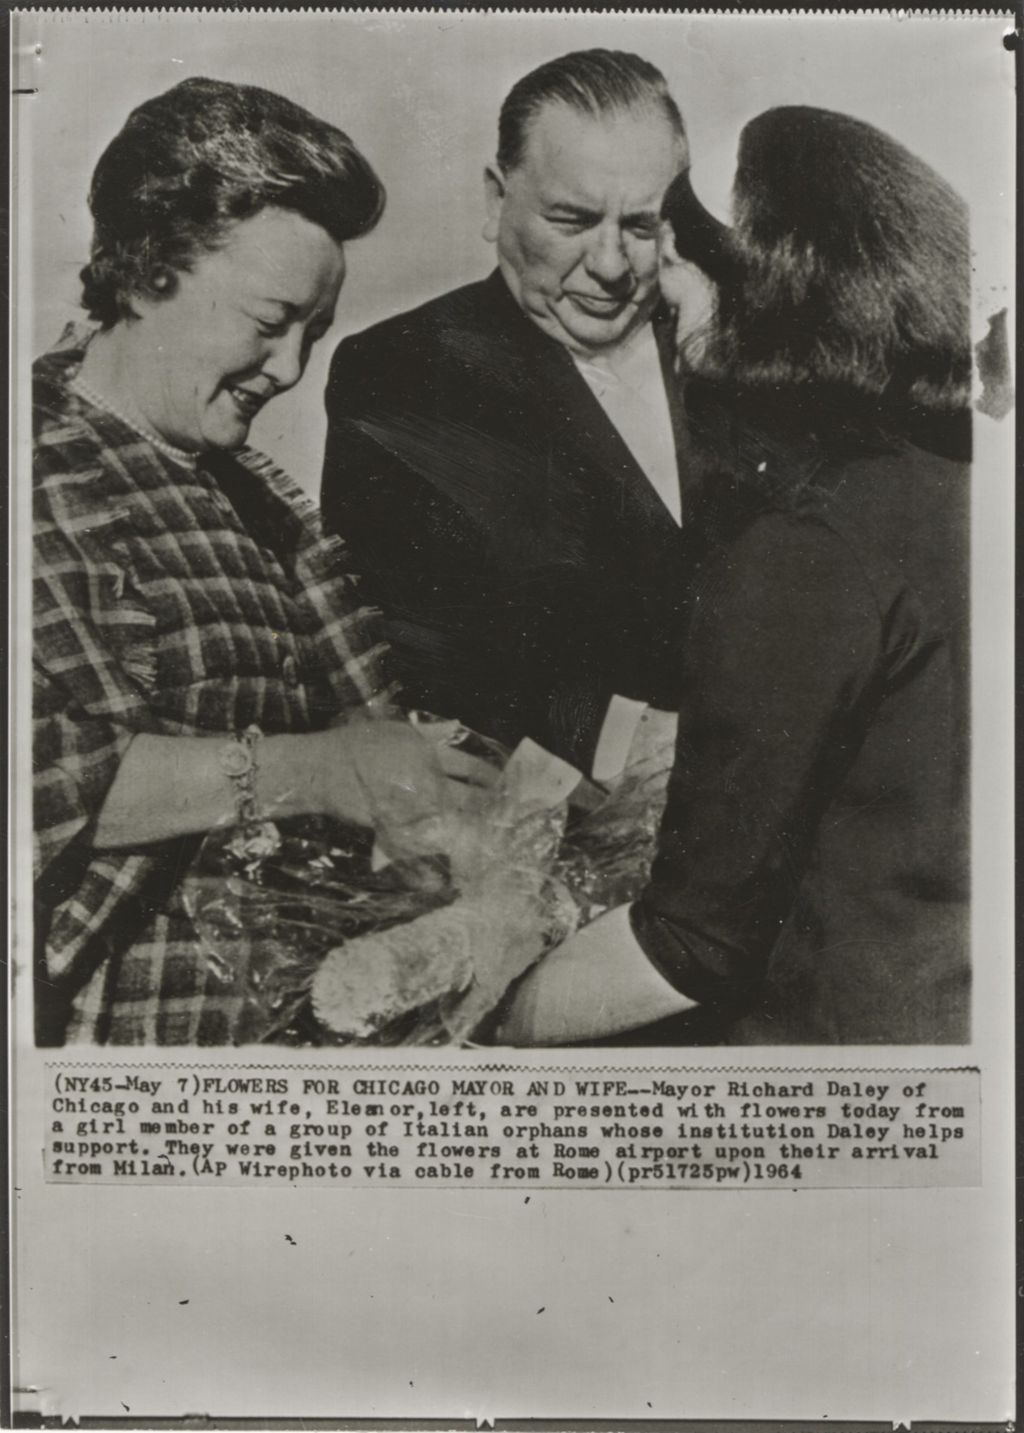 Richard J. Daley and Eleanor Daley receiving flowers at Rome airport